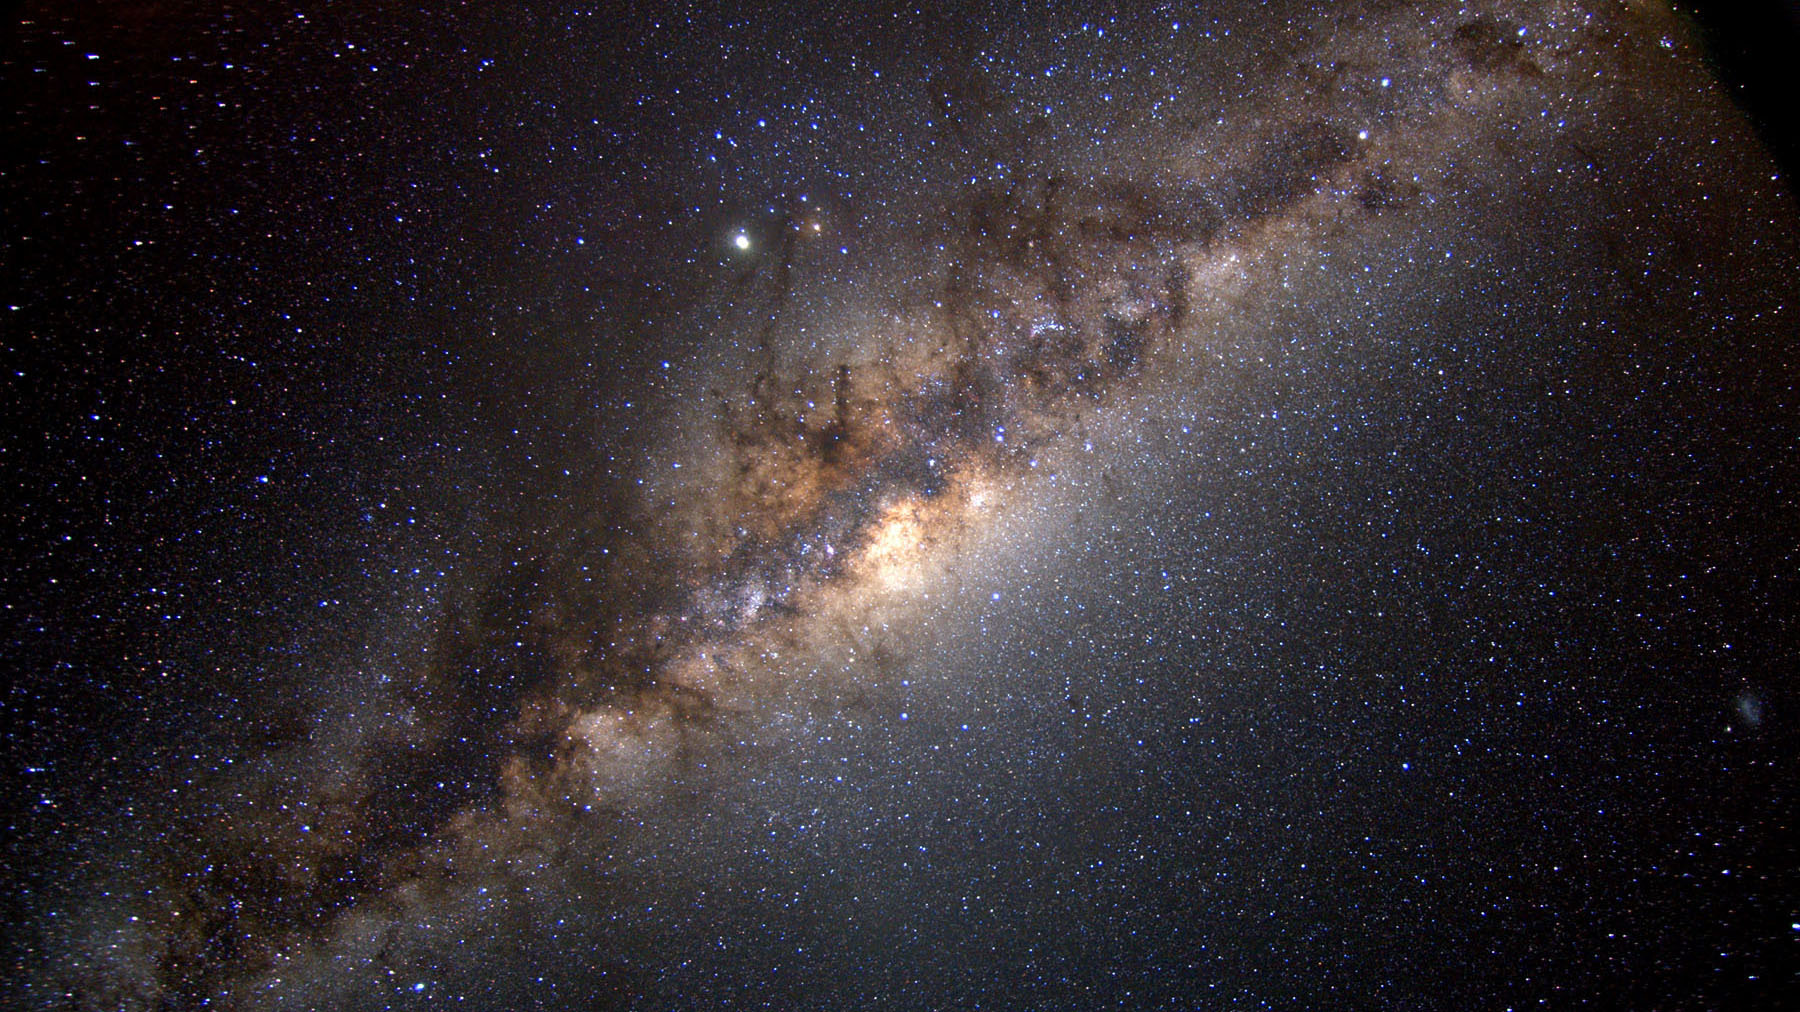 A speckled field of bluish stars is intersected by a diagonal strip of purple and brown clouds covering a glowing yellow band beyond.